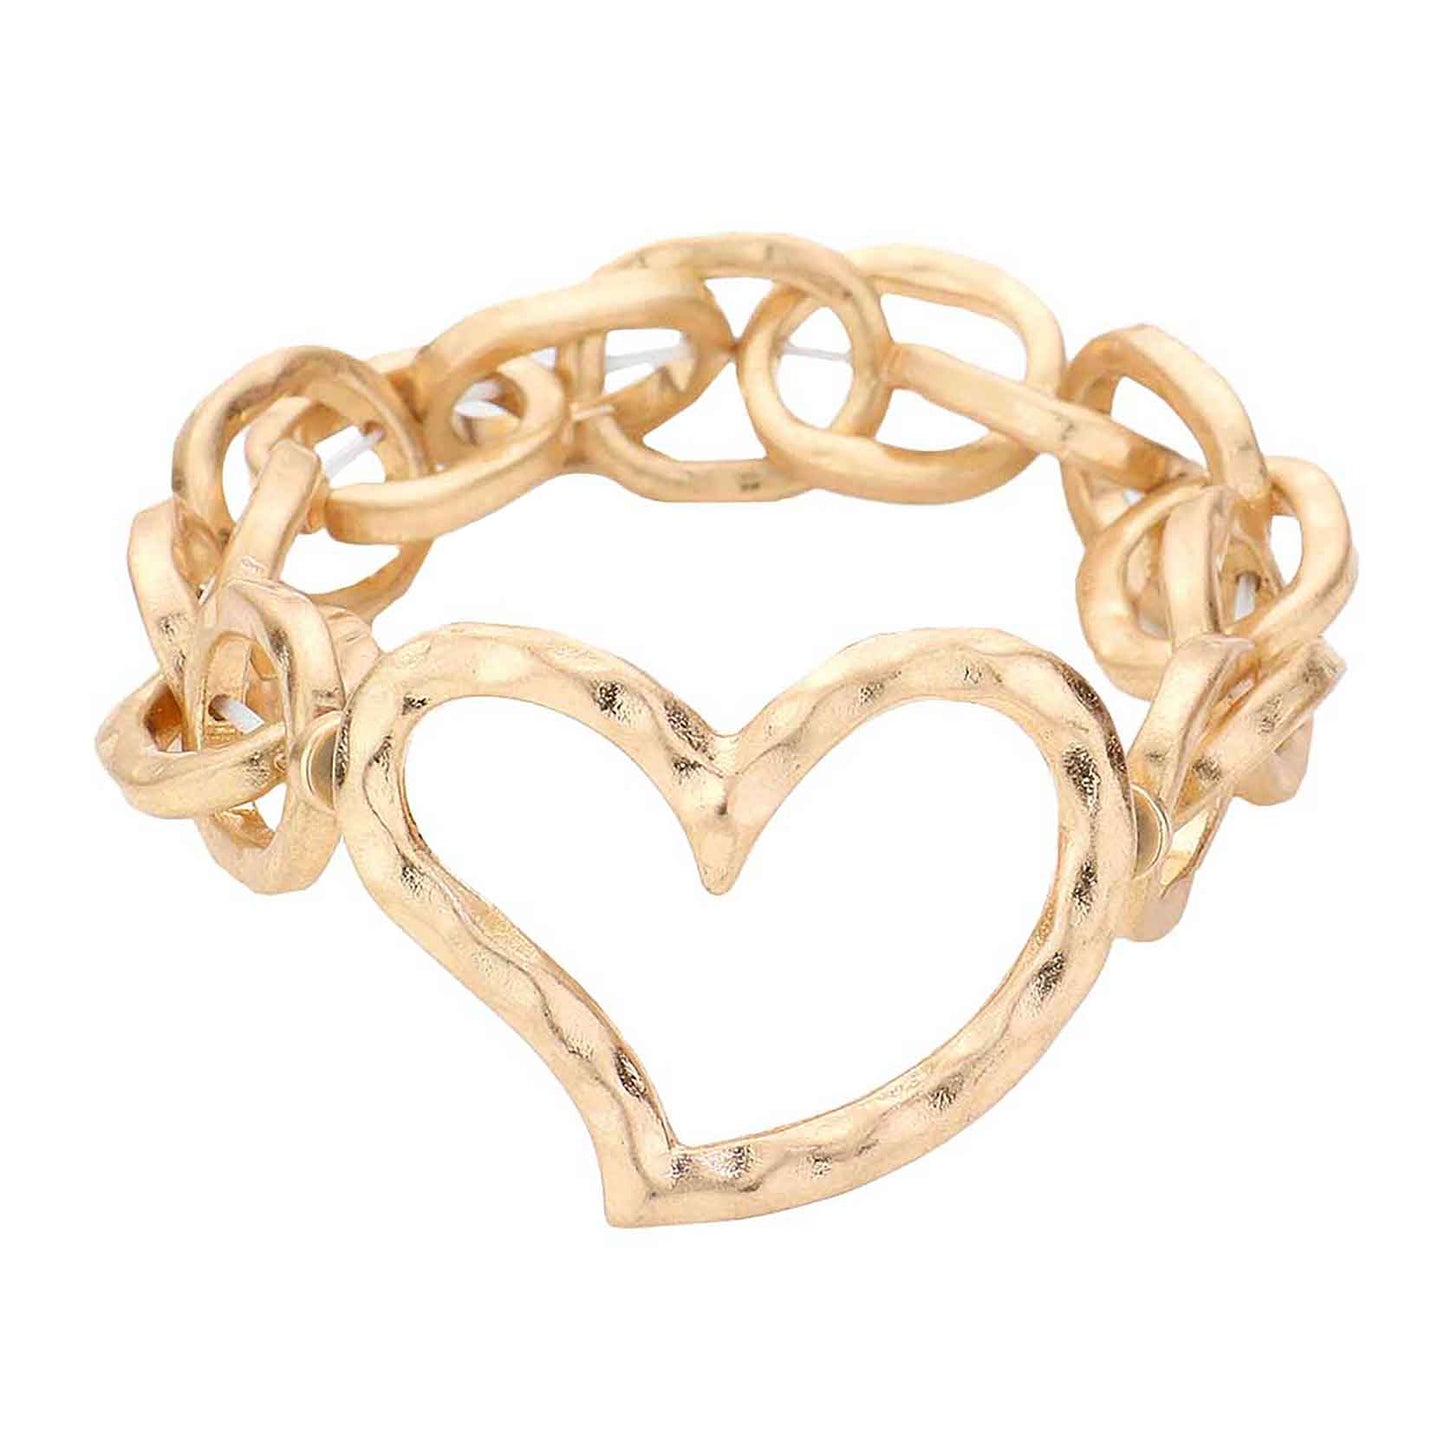 Worn Gold Hammered Open Metal Heart Stretch Bracelet, These Metal Heart bracelets are easy to put on, take off and so comfortable to for daily wear. Pair these with tee and jeans and you are good to go. It will be your new favorite go-to accessory. Perfect Birthday gift, friendship day, Mother's Day, Graduation Gift or any special occasion.